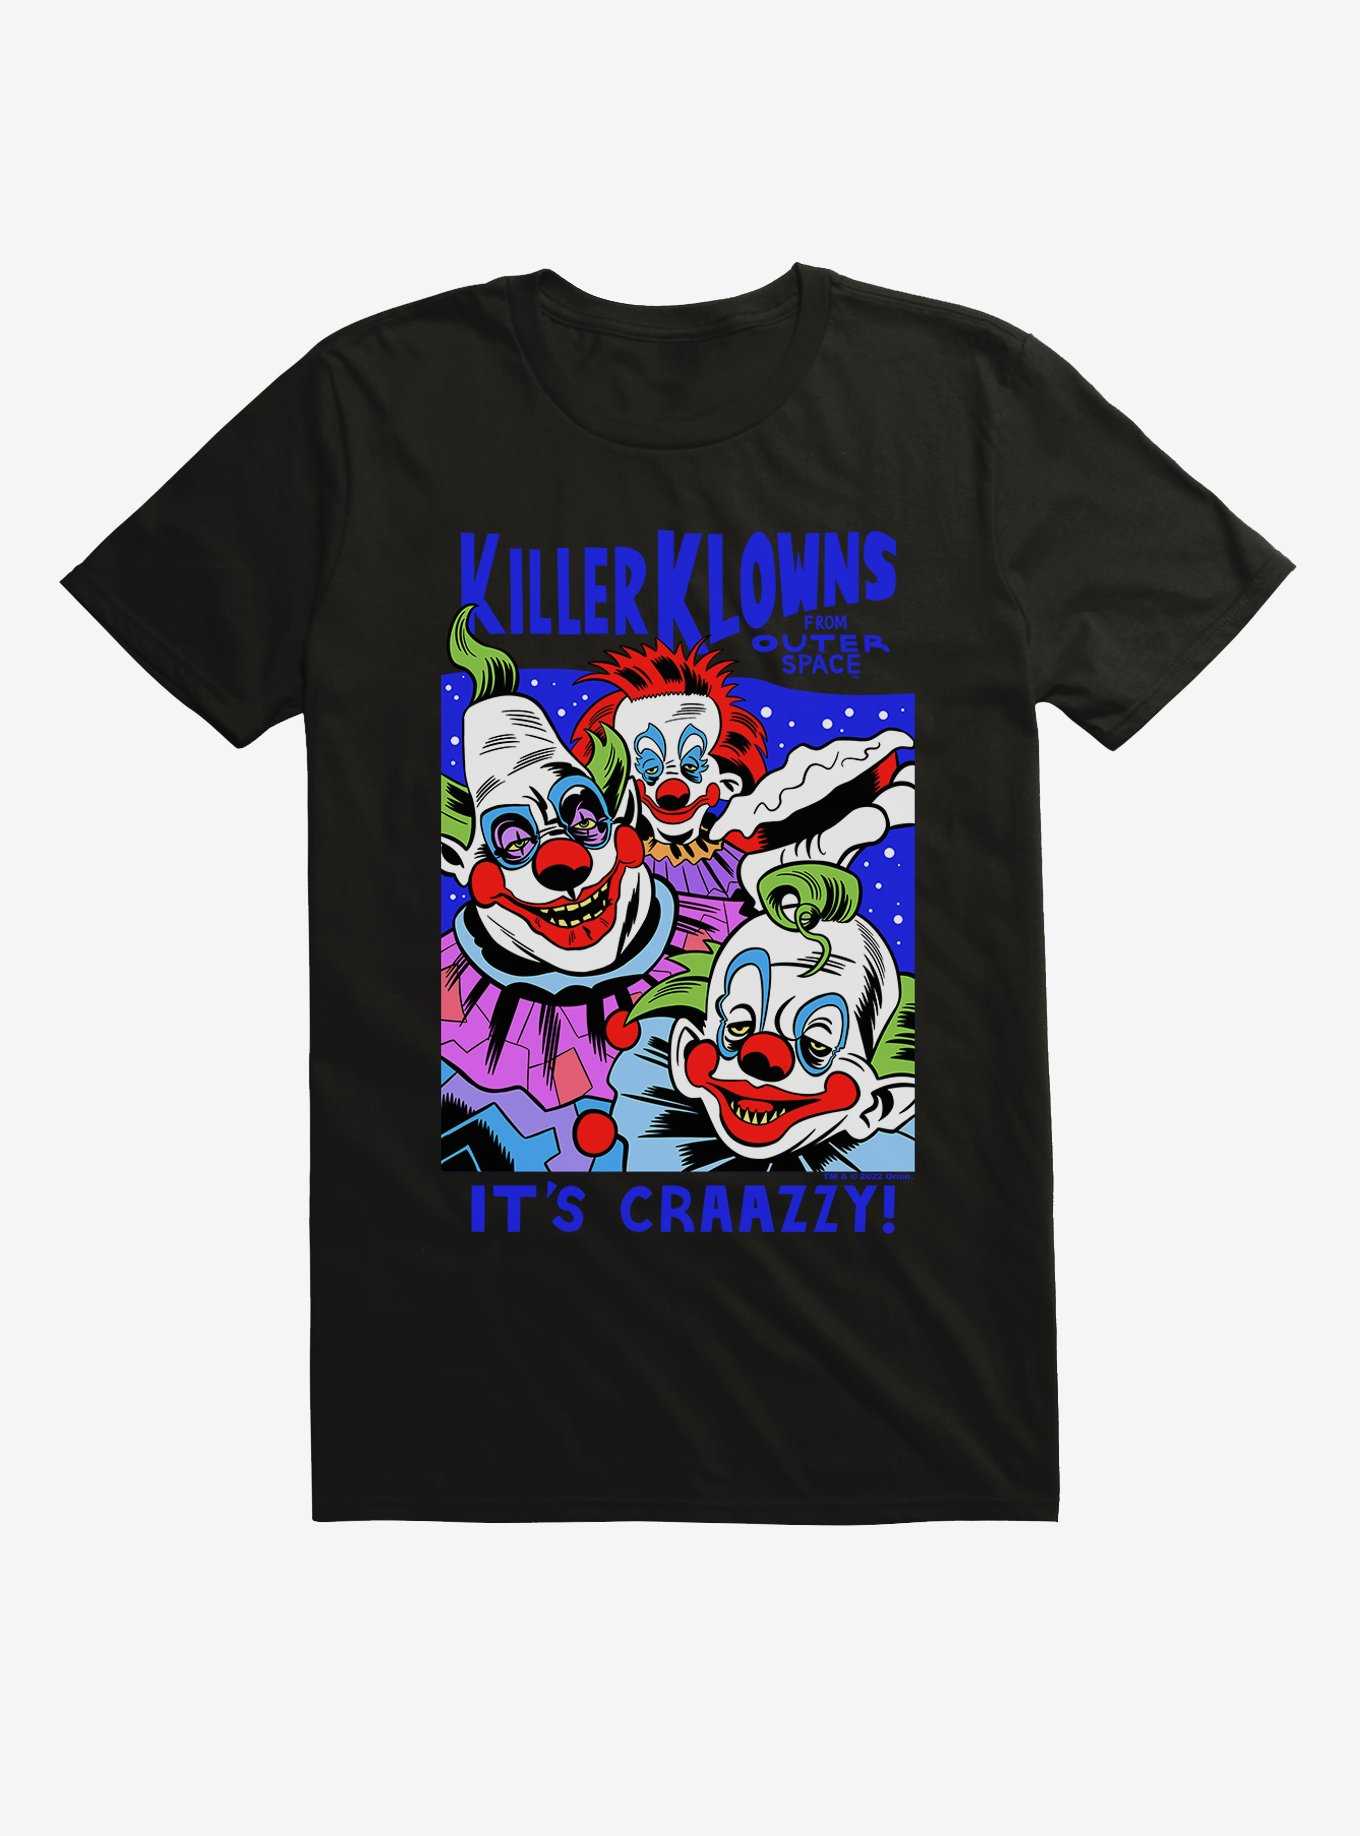 Killer Klowns From Outer Space It's Craazzy! T-Shirt, , hi-res